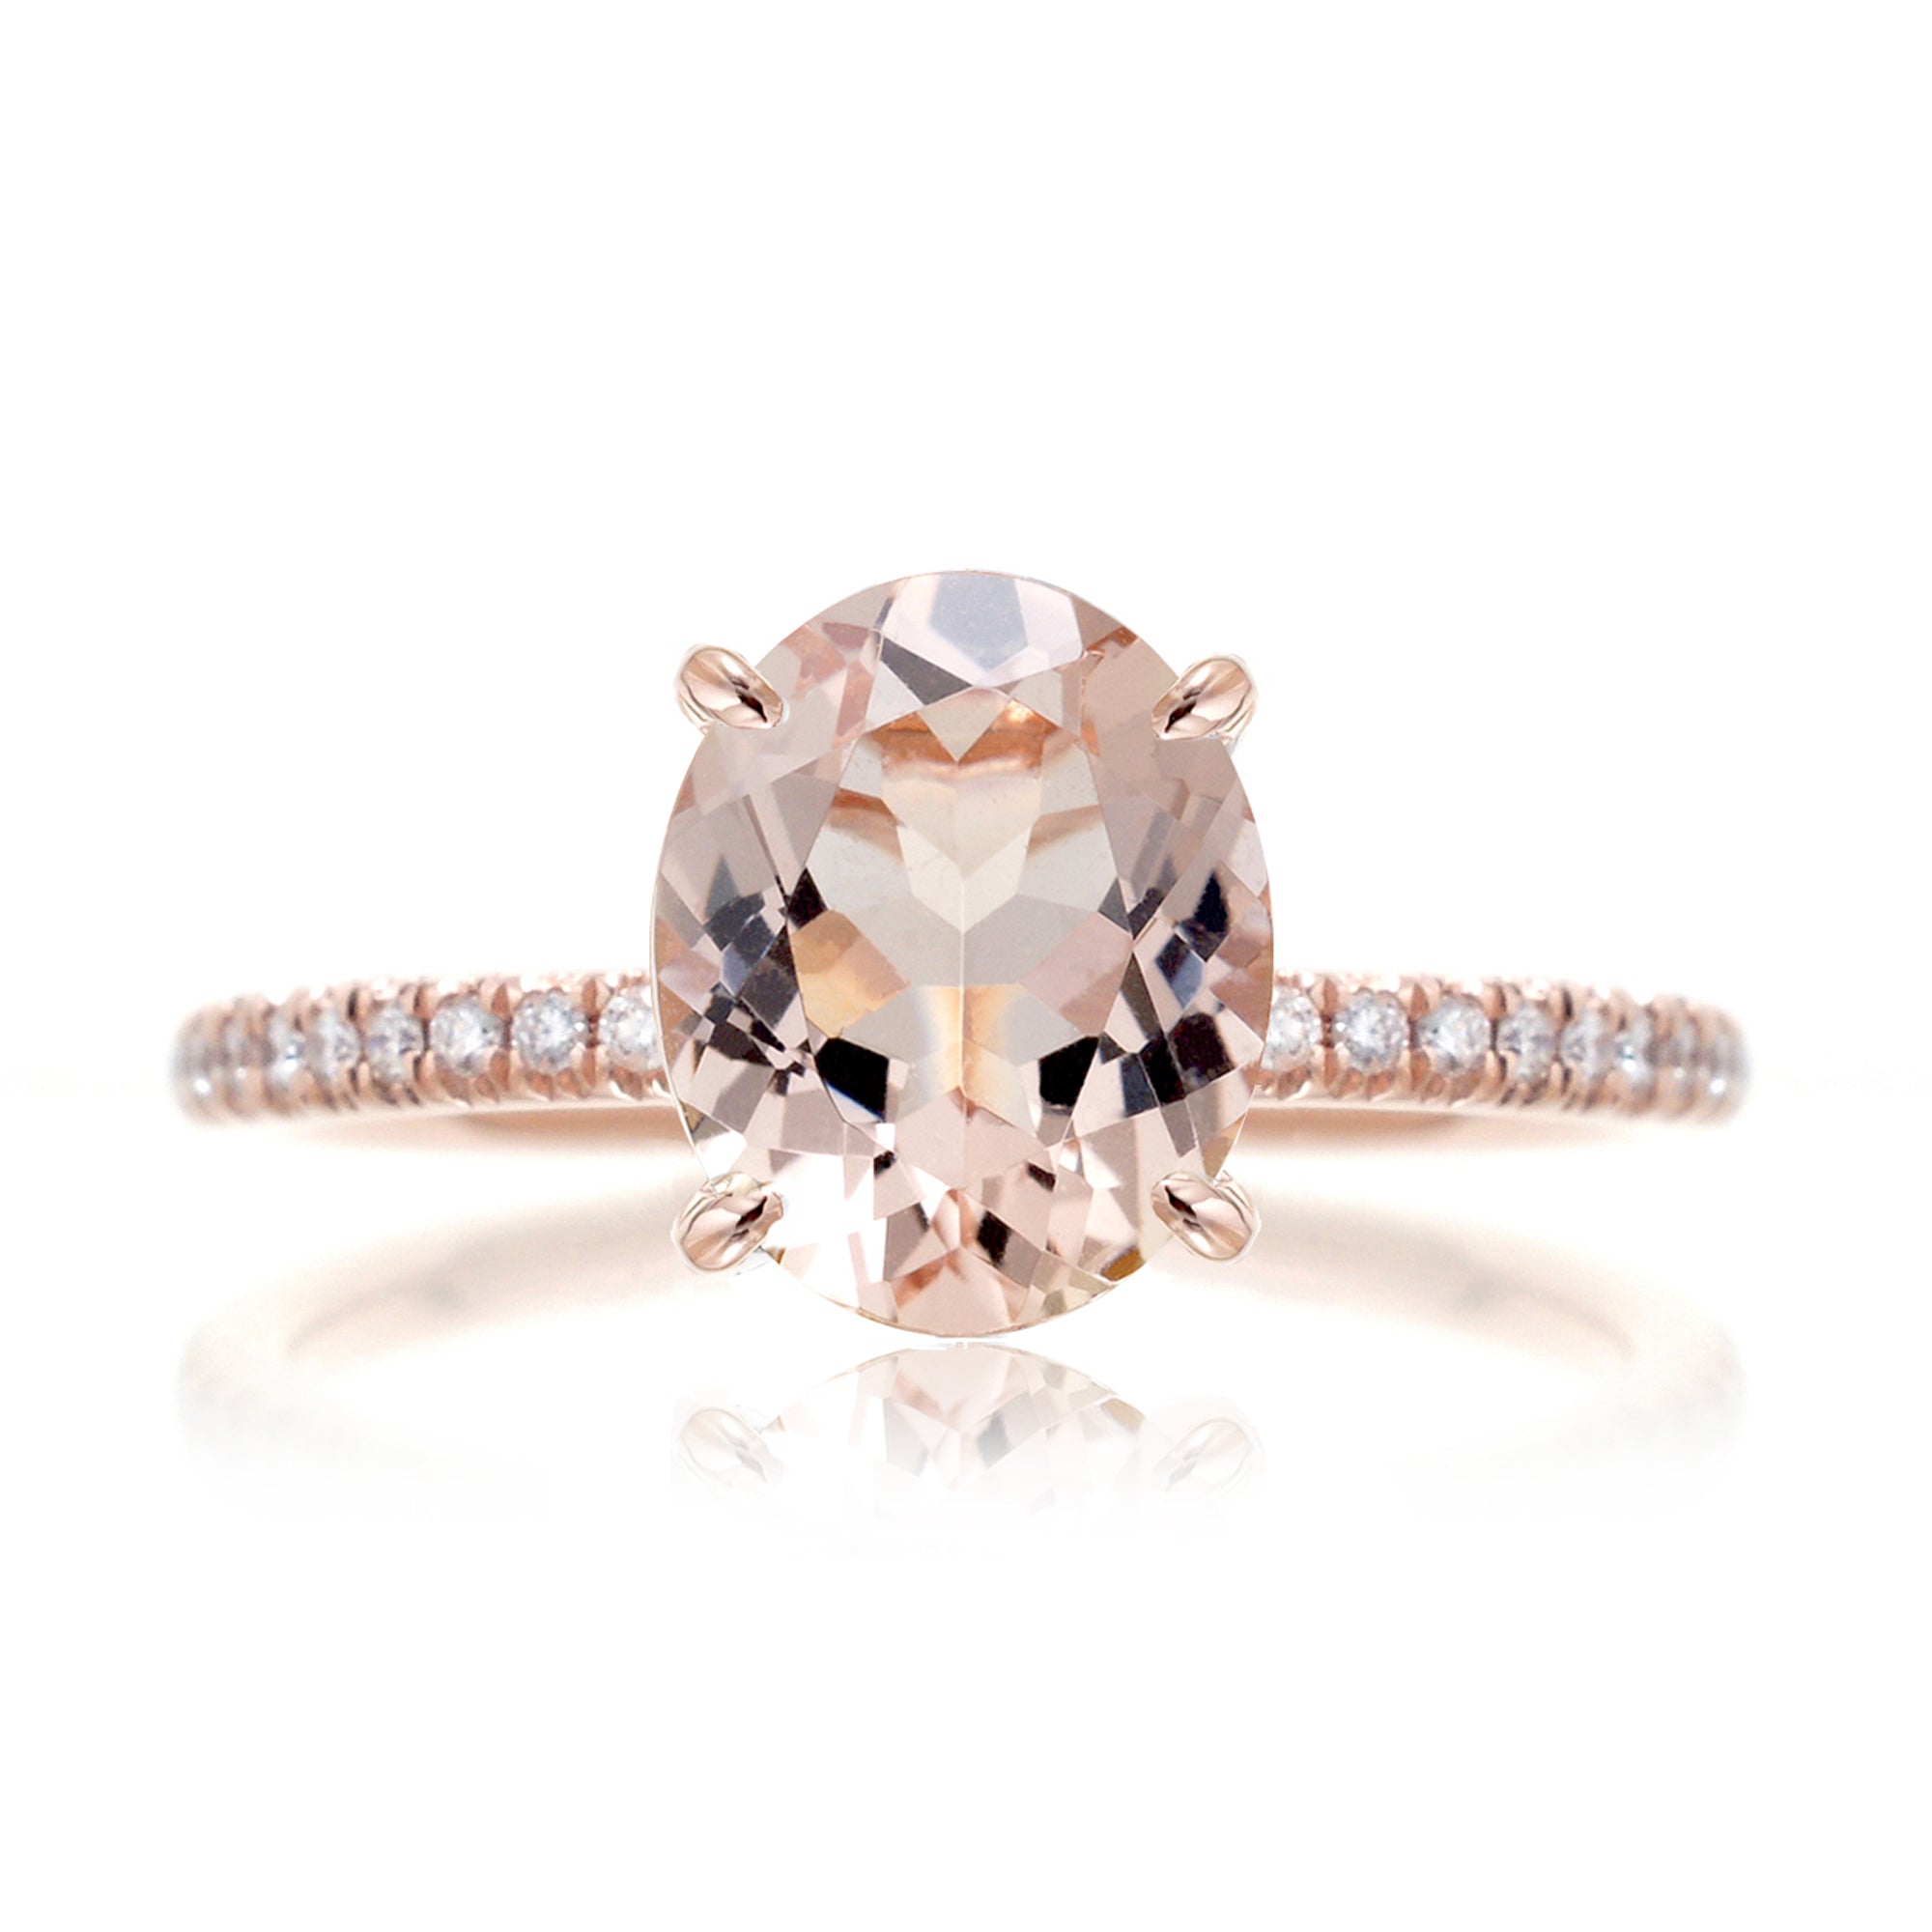 Oval morganite diamond band engagement ring rose gold - The Ava